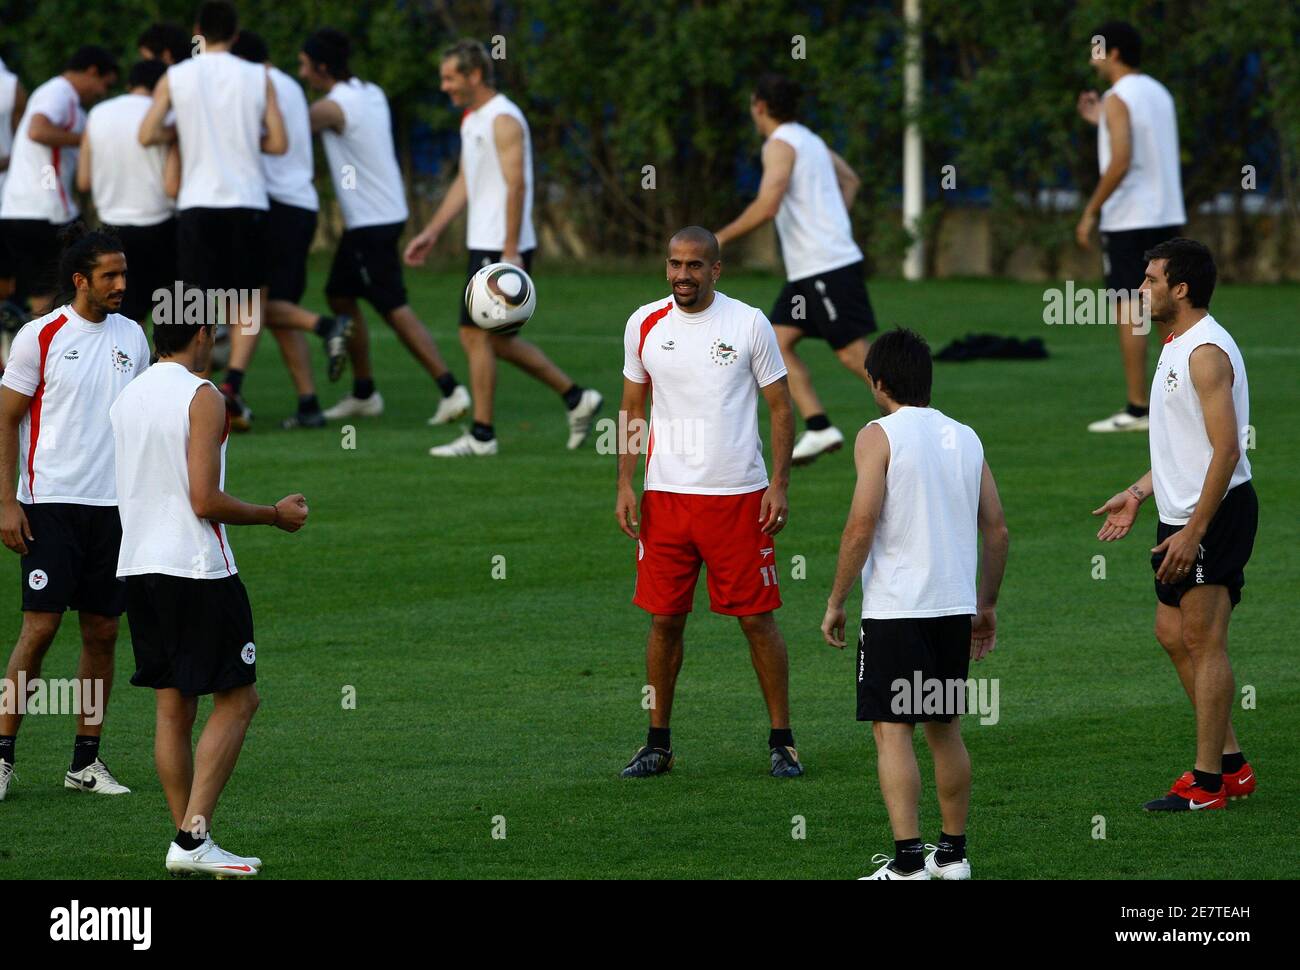 Estudiantes' Juan Sebastian Veron (C) takes part in a training session with teammates in Abu Dhabi December 18, 2009. Argentina's Estudiantes, the South American champions, play Barcelona in Saturday's FIFA Club World Cup final soccer match. REUTERS/Fahad Shadeed (UNITED ARAB EMIRATES - Tags: SPORT SOCCER) Stock Photo